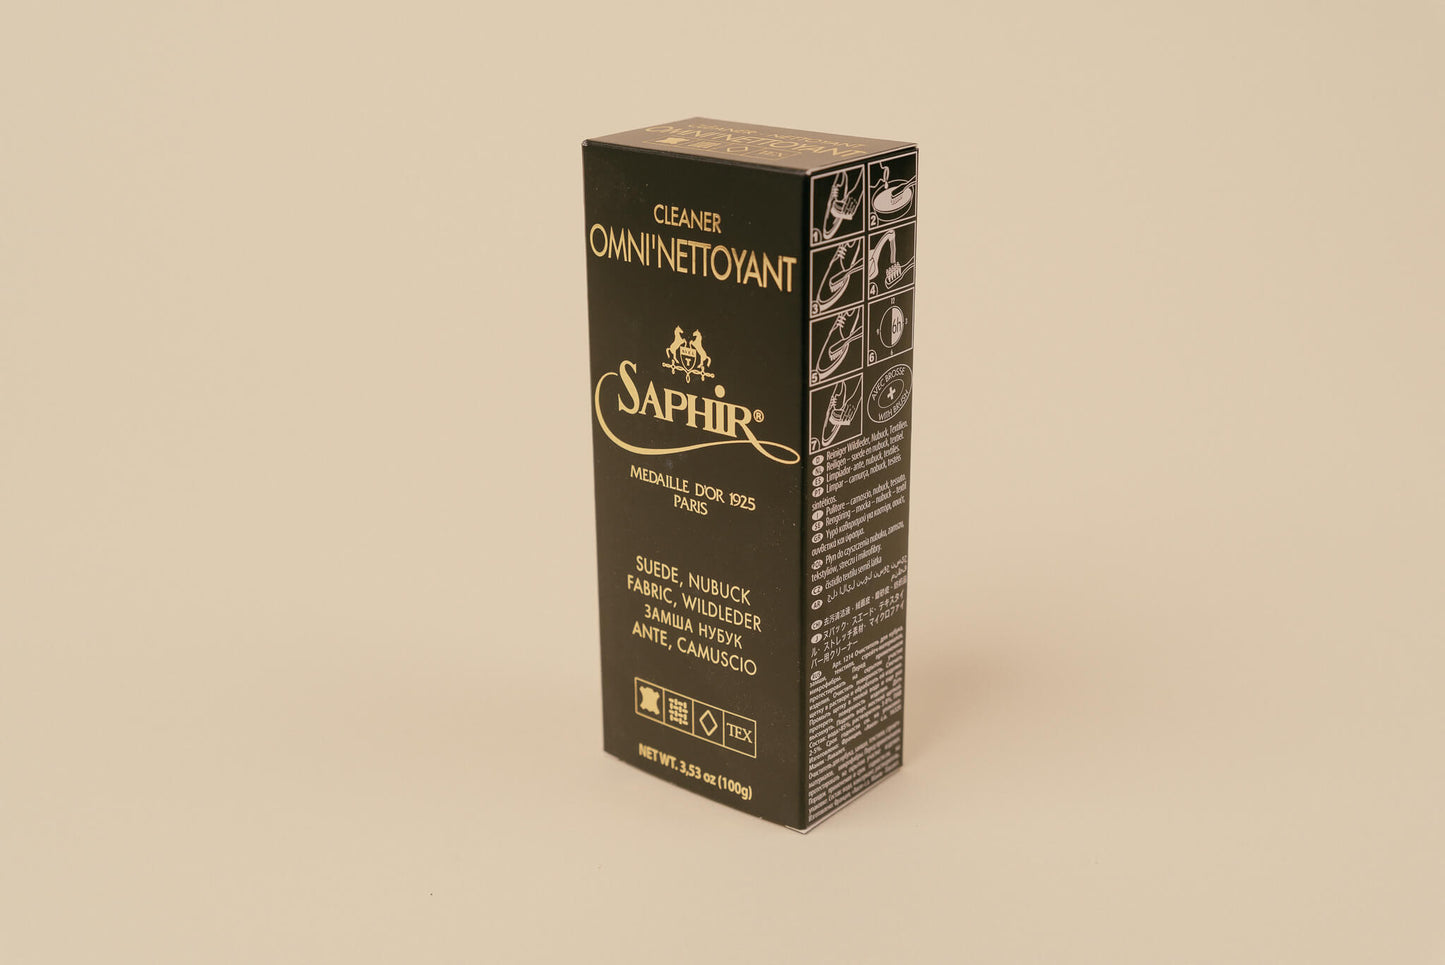 Saphir Medaille d'Or 1925 Omni'Nettoyant Suede Shampoo - Brillare only box 